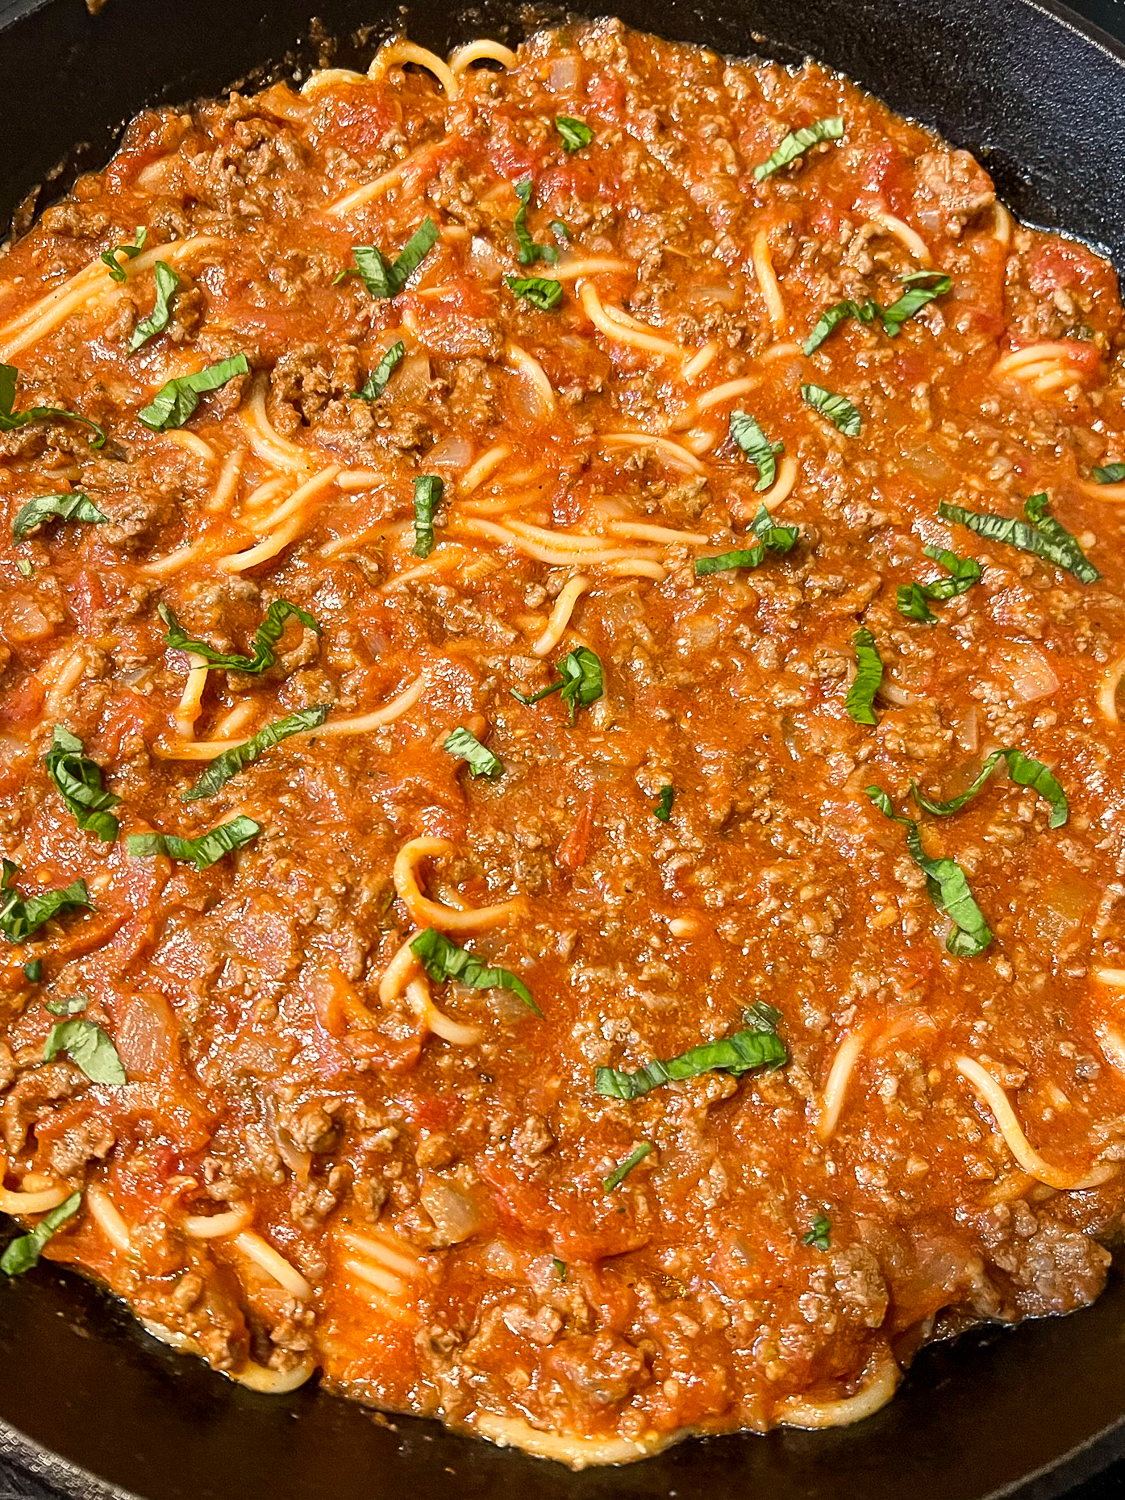 Freshly chopped basil atop the meat sauce.